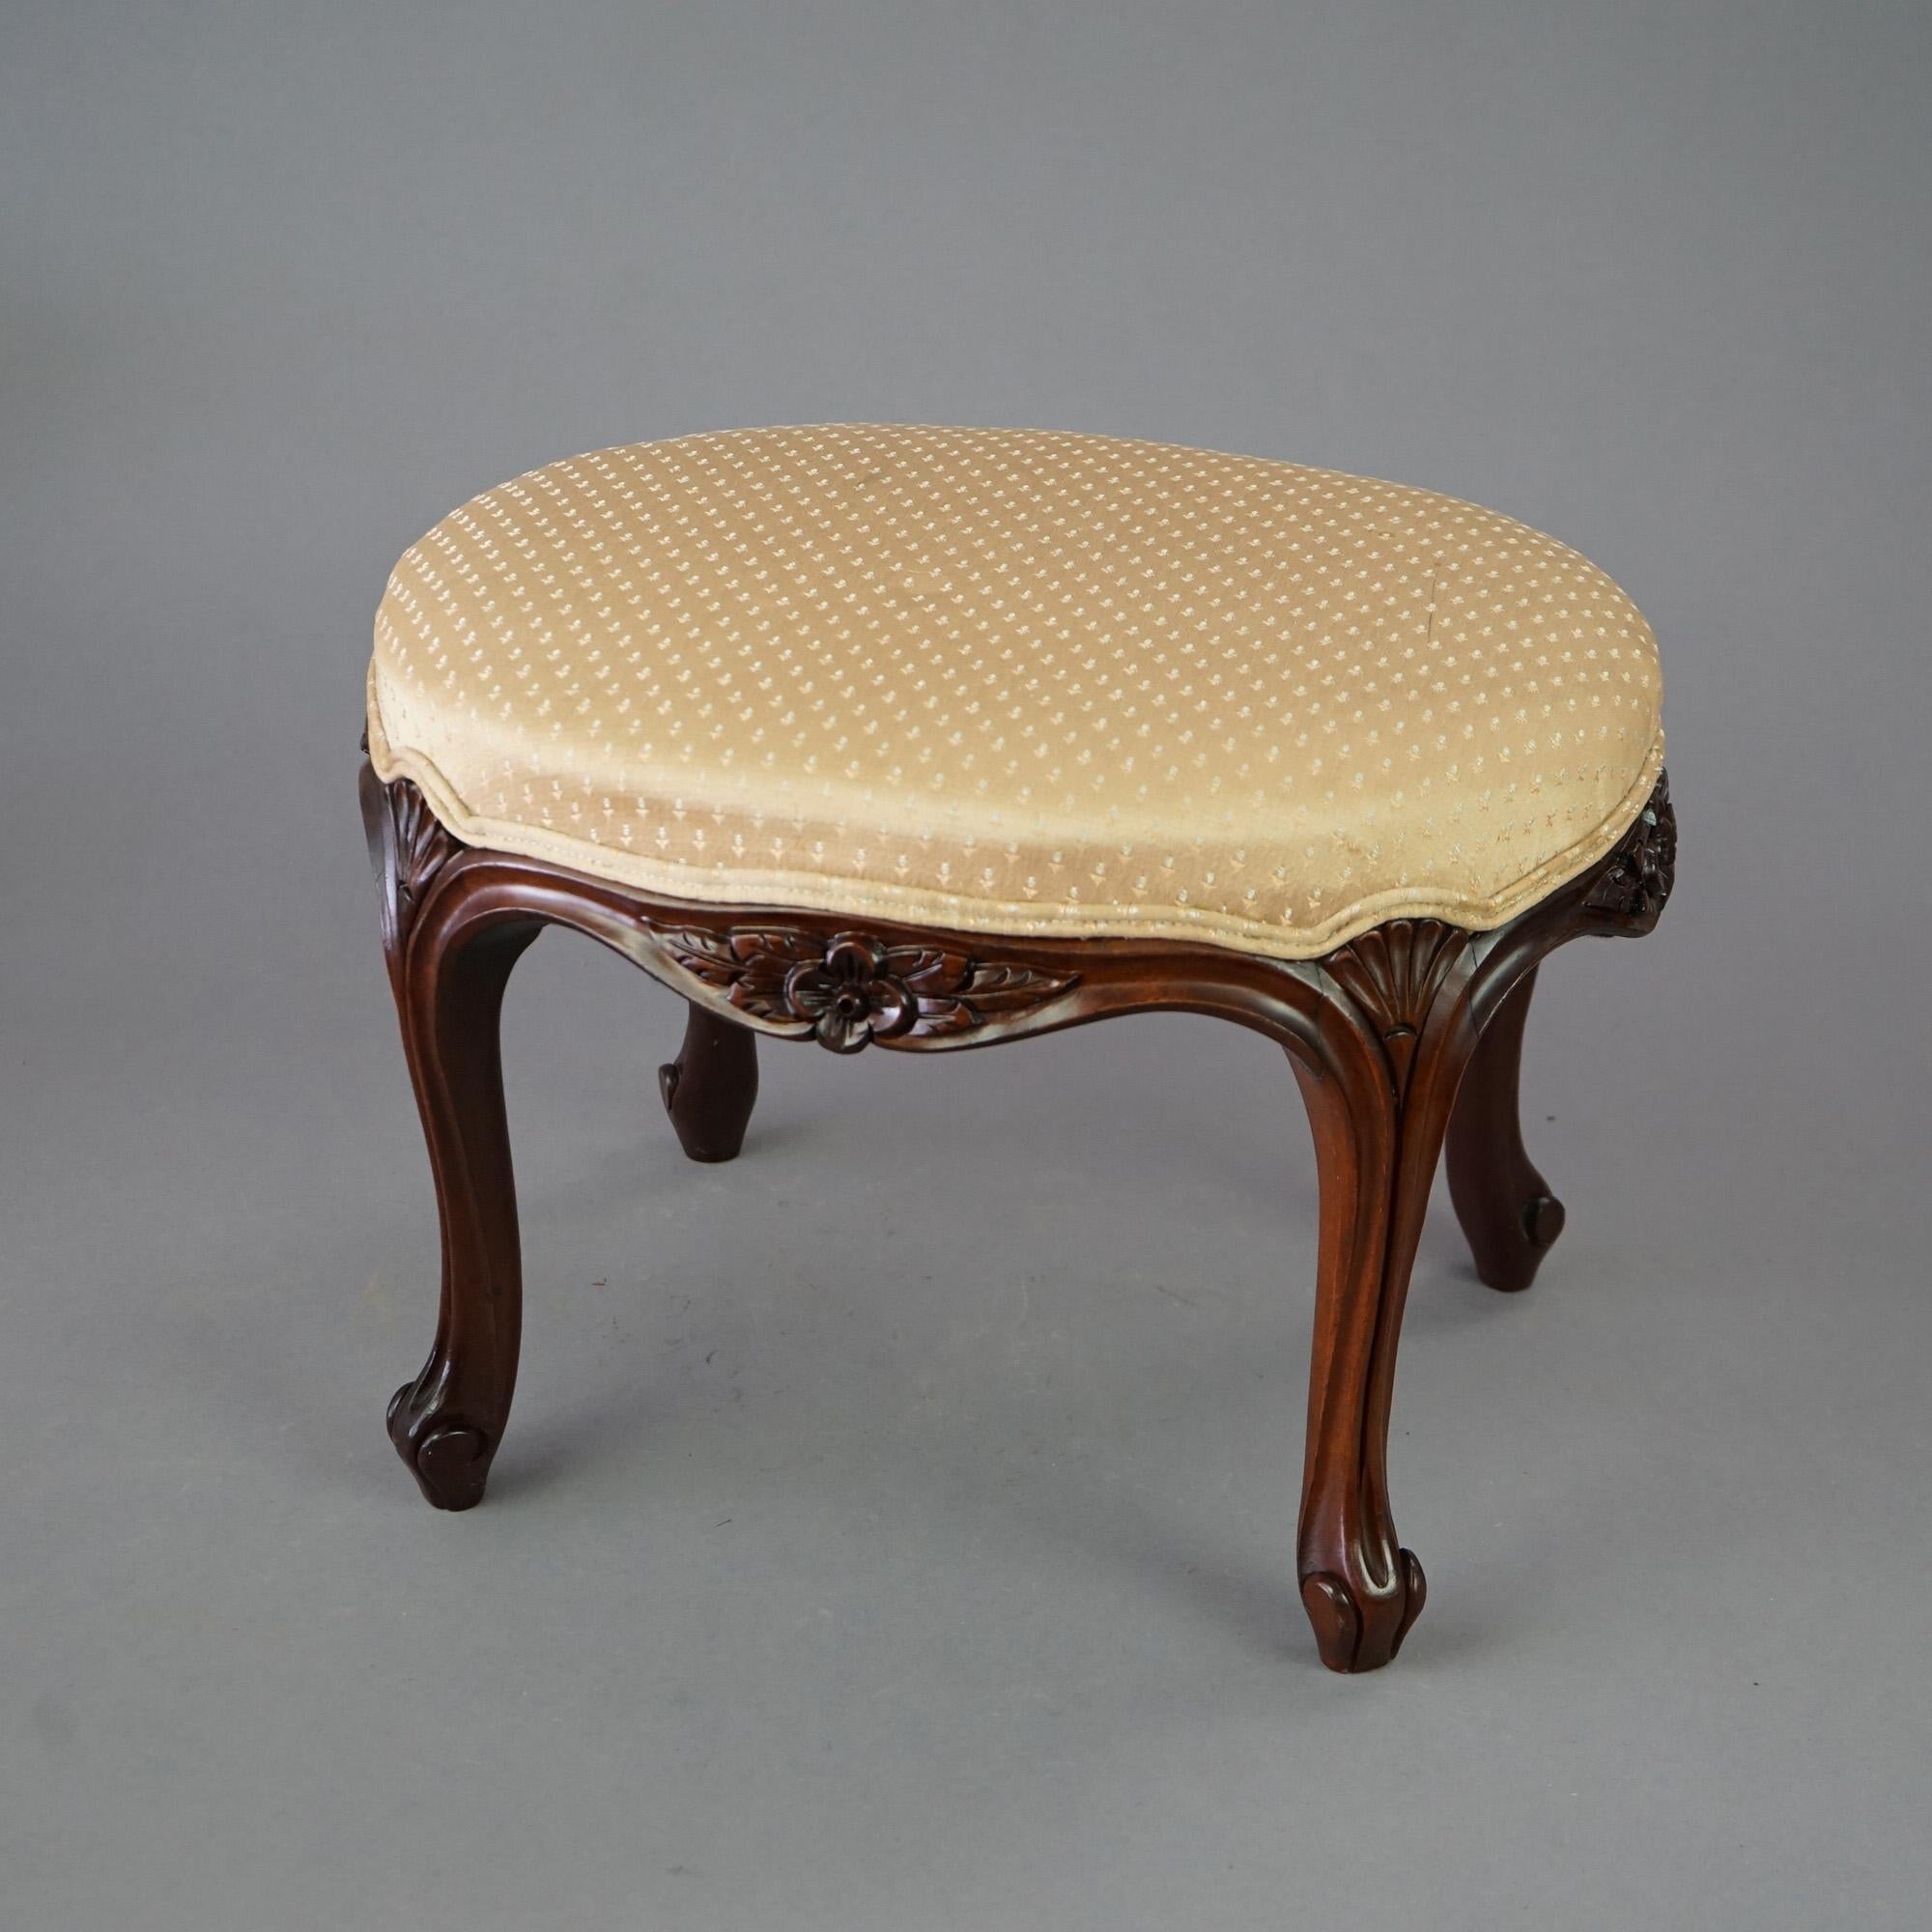 An antique French Louis XIV footstool offers upholstered seat in oval form with floral carved frame having cabriole legs, c1900

Measures- 14''H x 20''W x 15.75''D.